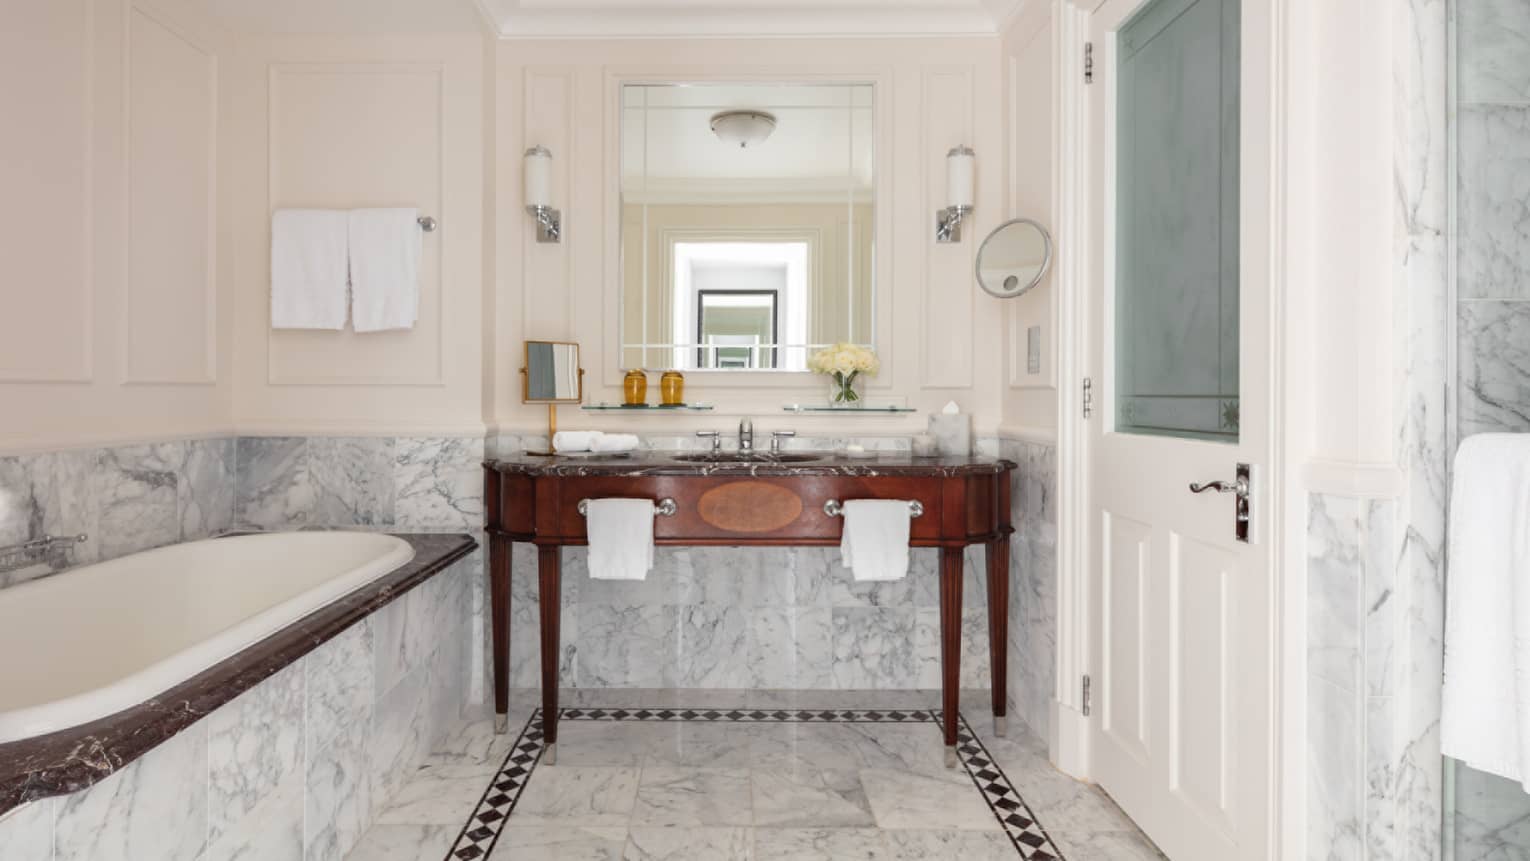 Bathroom with marble accents, large soaking tub, double wooden vanity, mirror